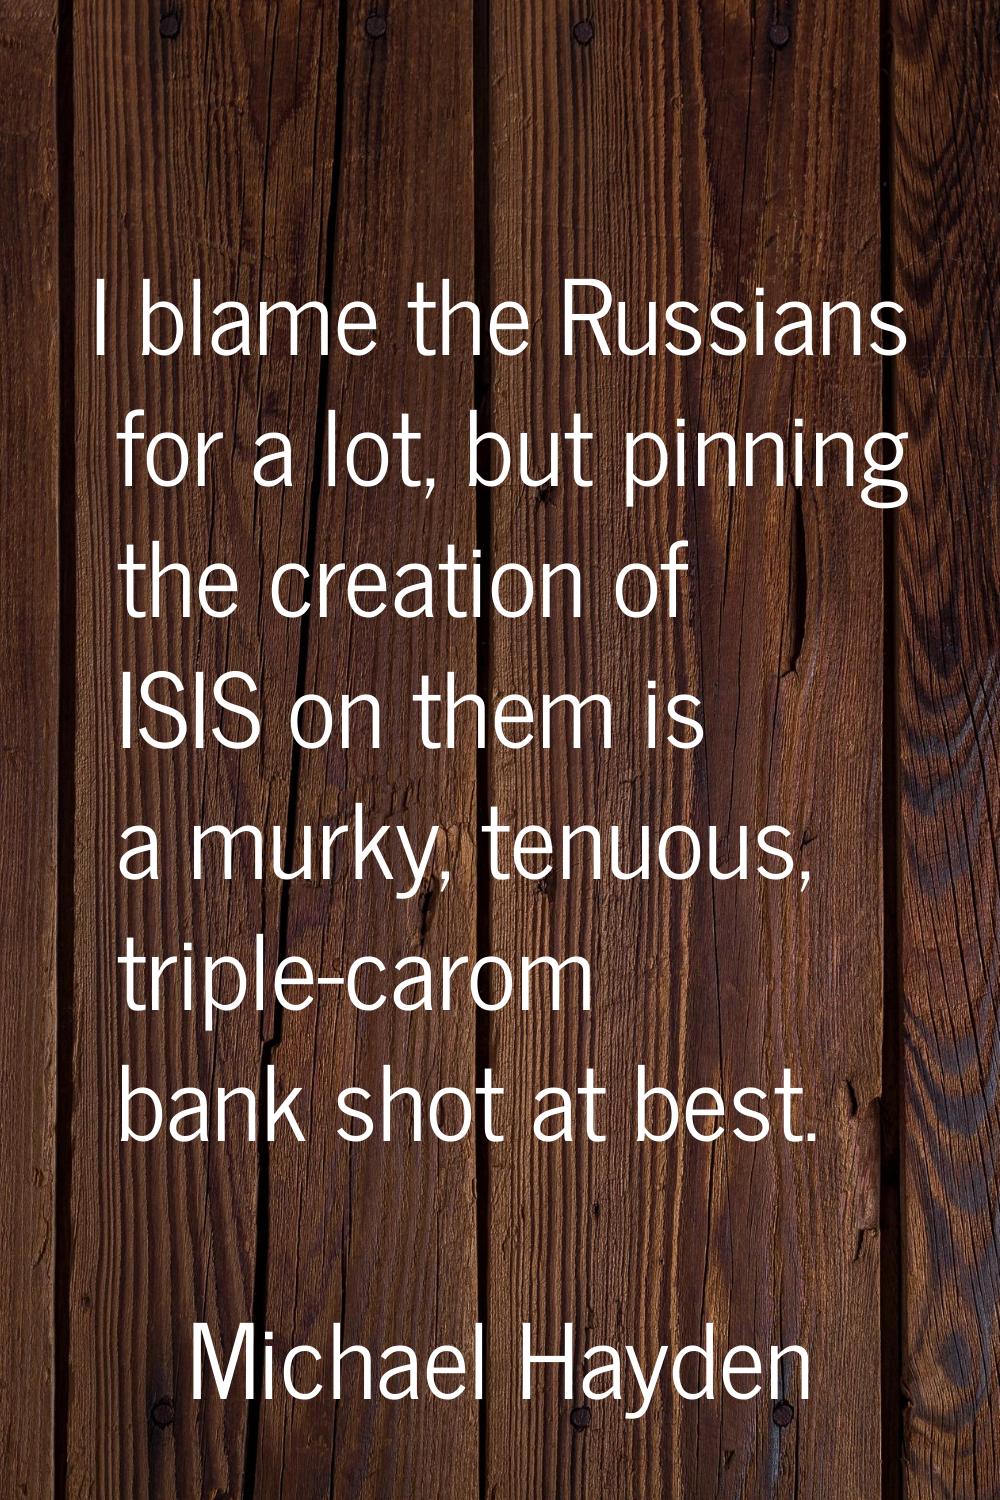 I blame the Russians for a lot, but pinning the creation of ISIS on them is a murky, tenuous, tripl